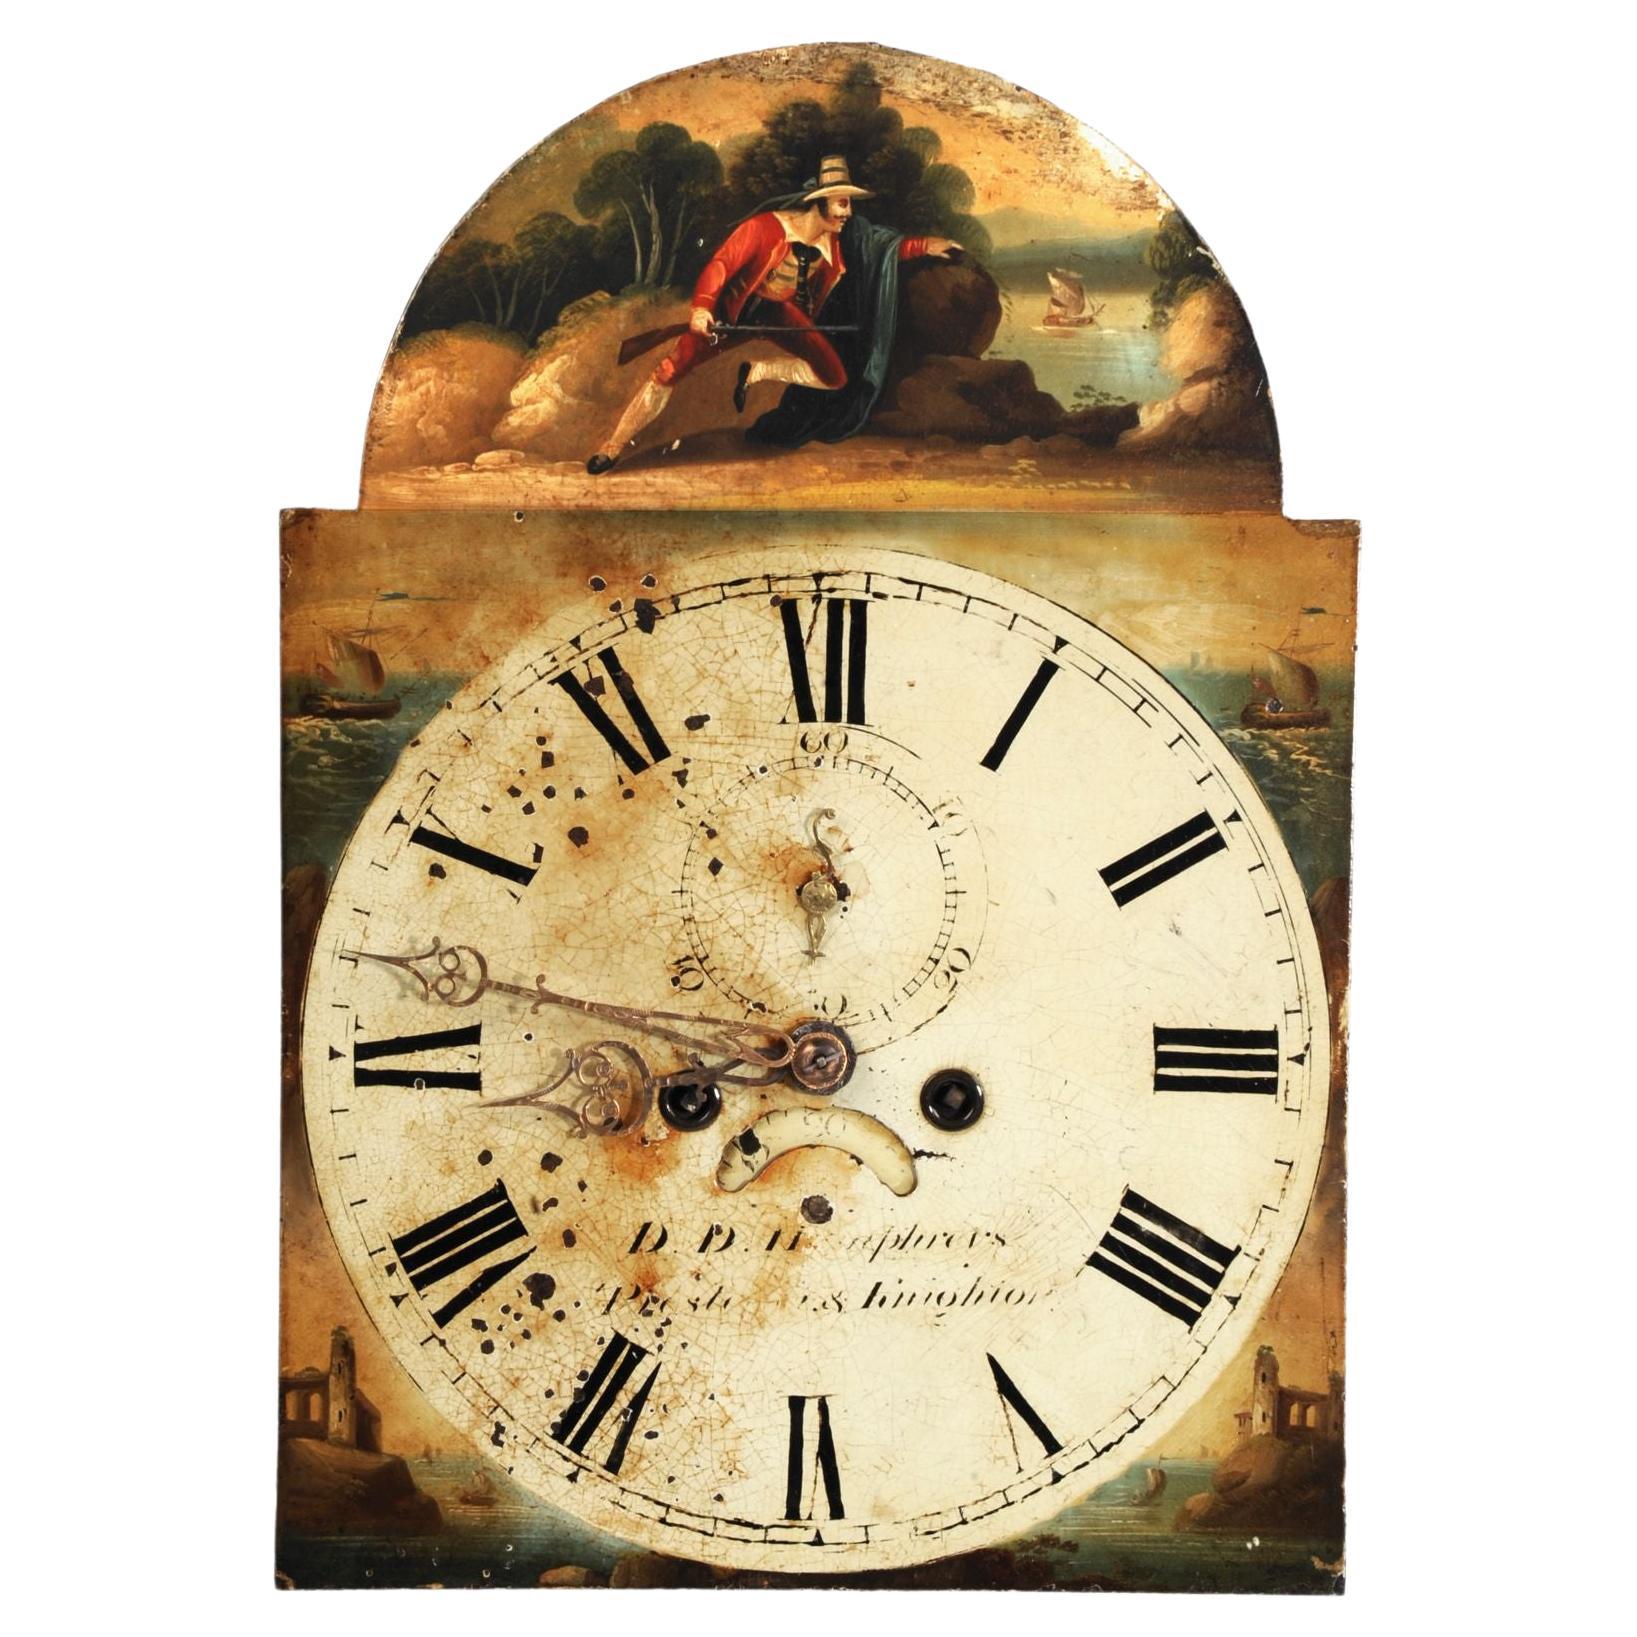 Antique English Iron Clock Dial Face, Smuggler, Fully Working with Seconds Hand For Sale